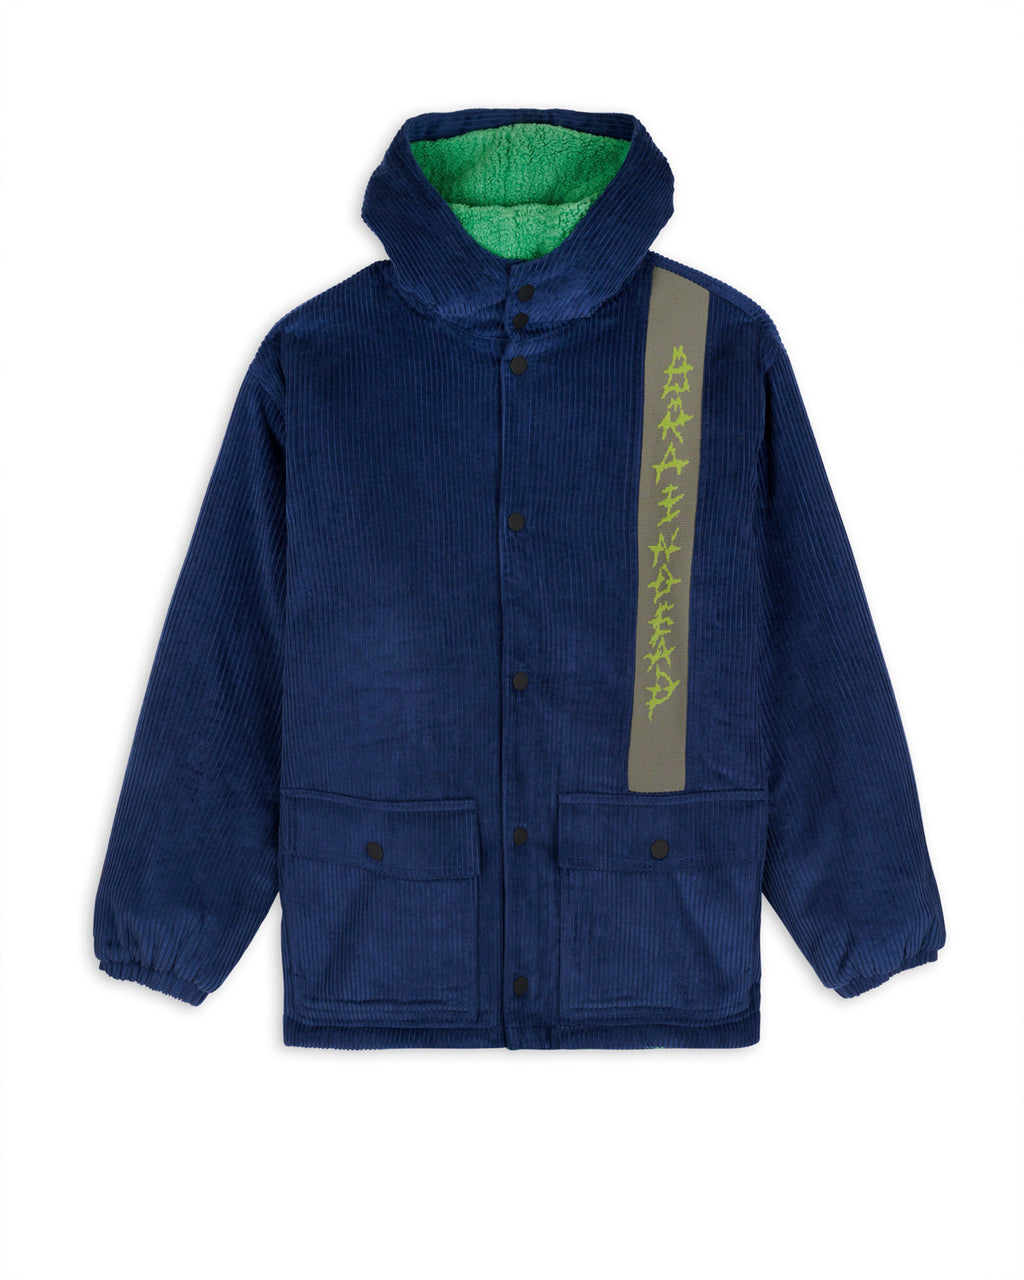 Forest Racing Jacket - Navy